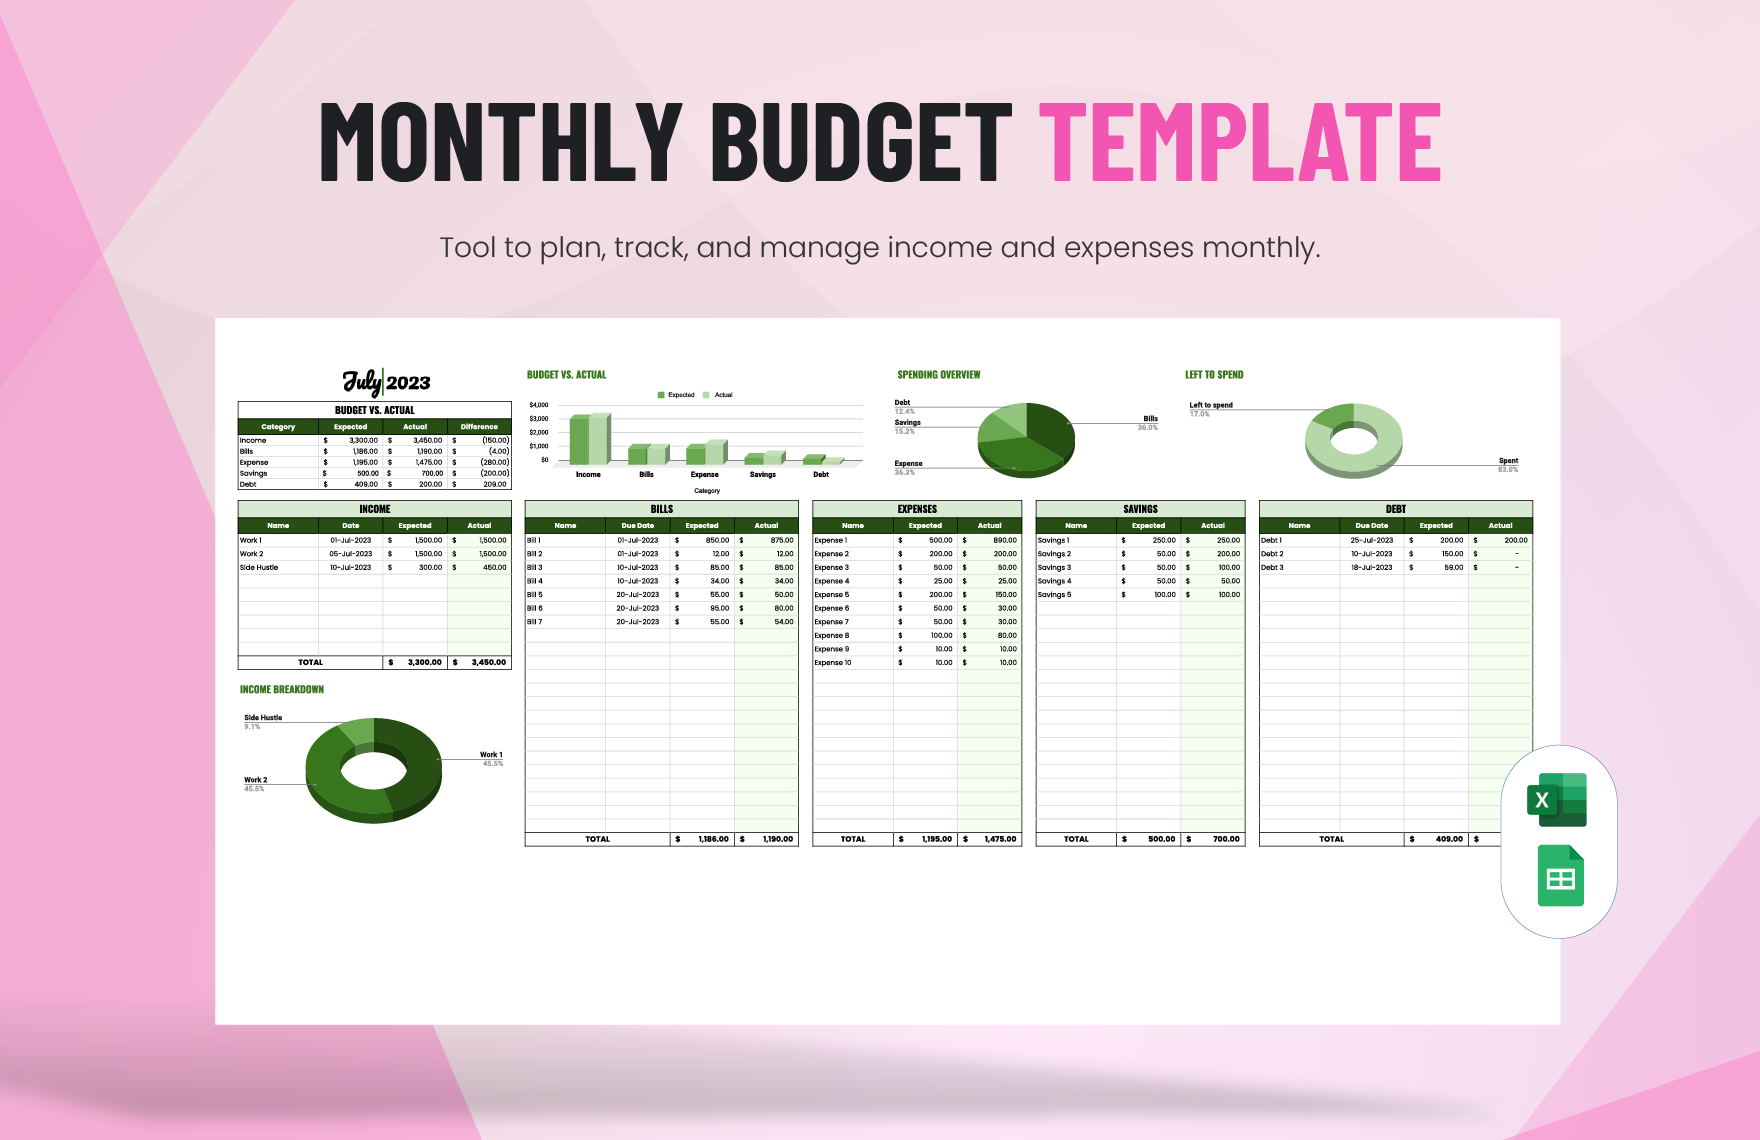 Monthly Budget Template in Excel, Google Sheets